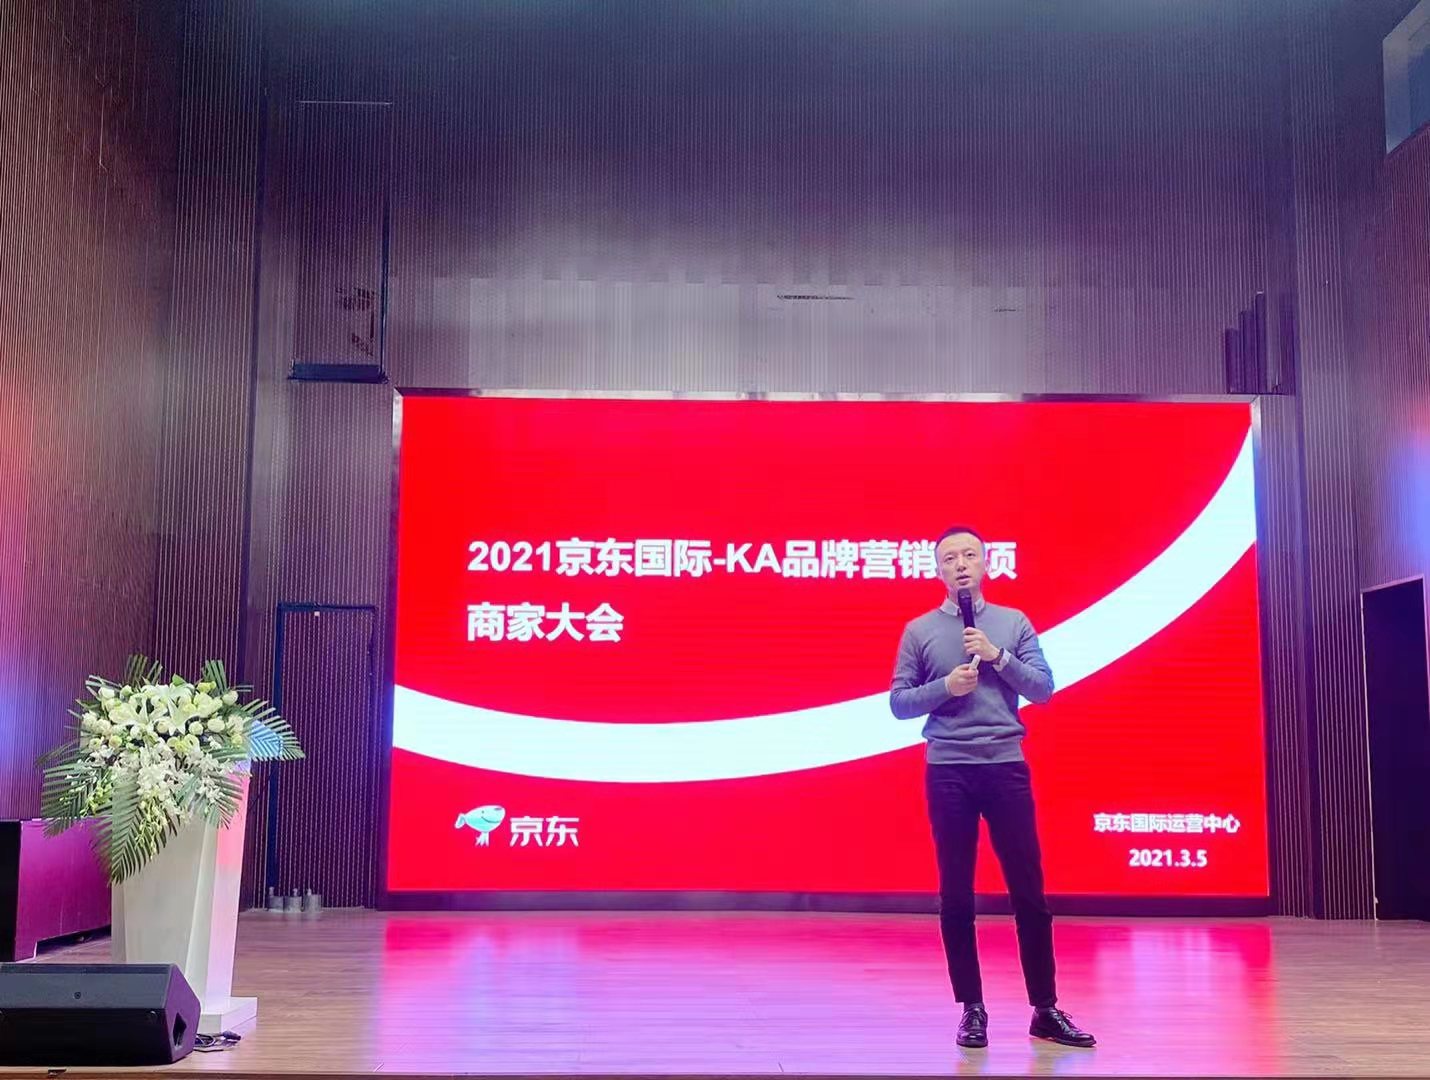 JD Worldwide has worked with companies including Wanda Cinemas and Taihe Music Group to open celebrity stores, and aims to work with 160 celebrities and well-known IPs to open stores in 2021.